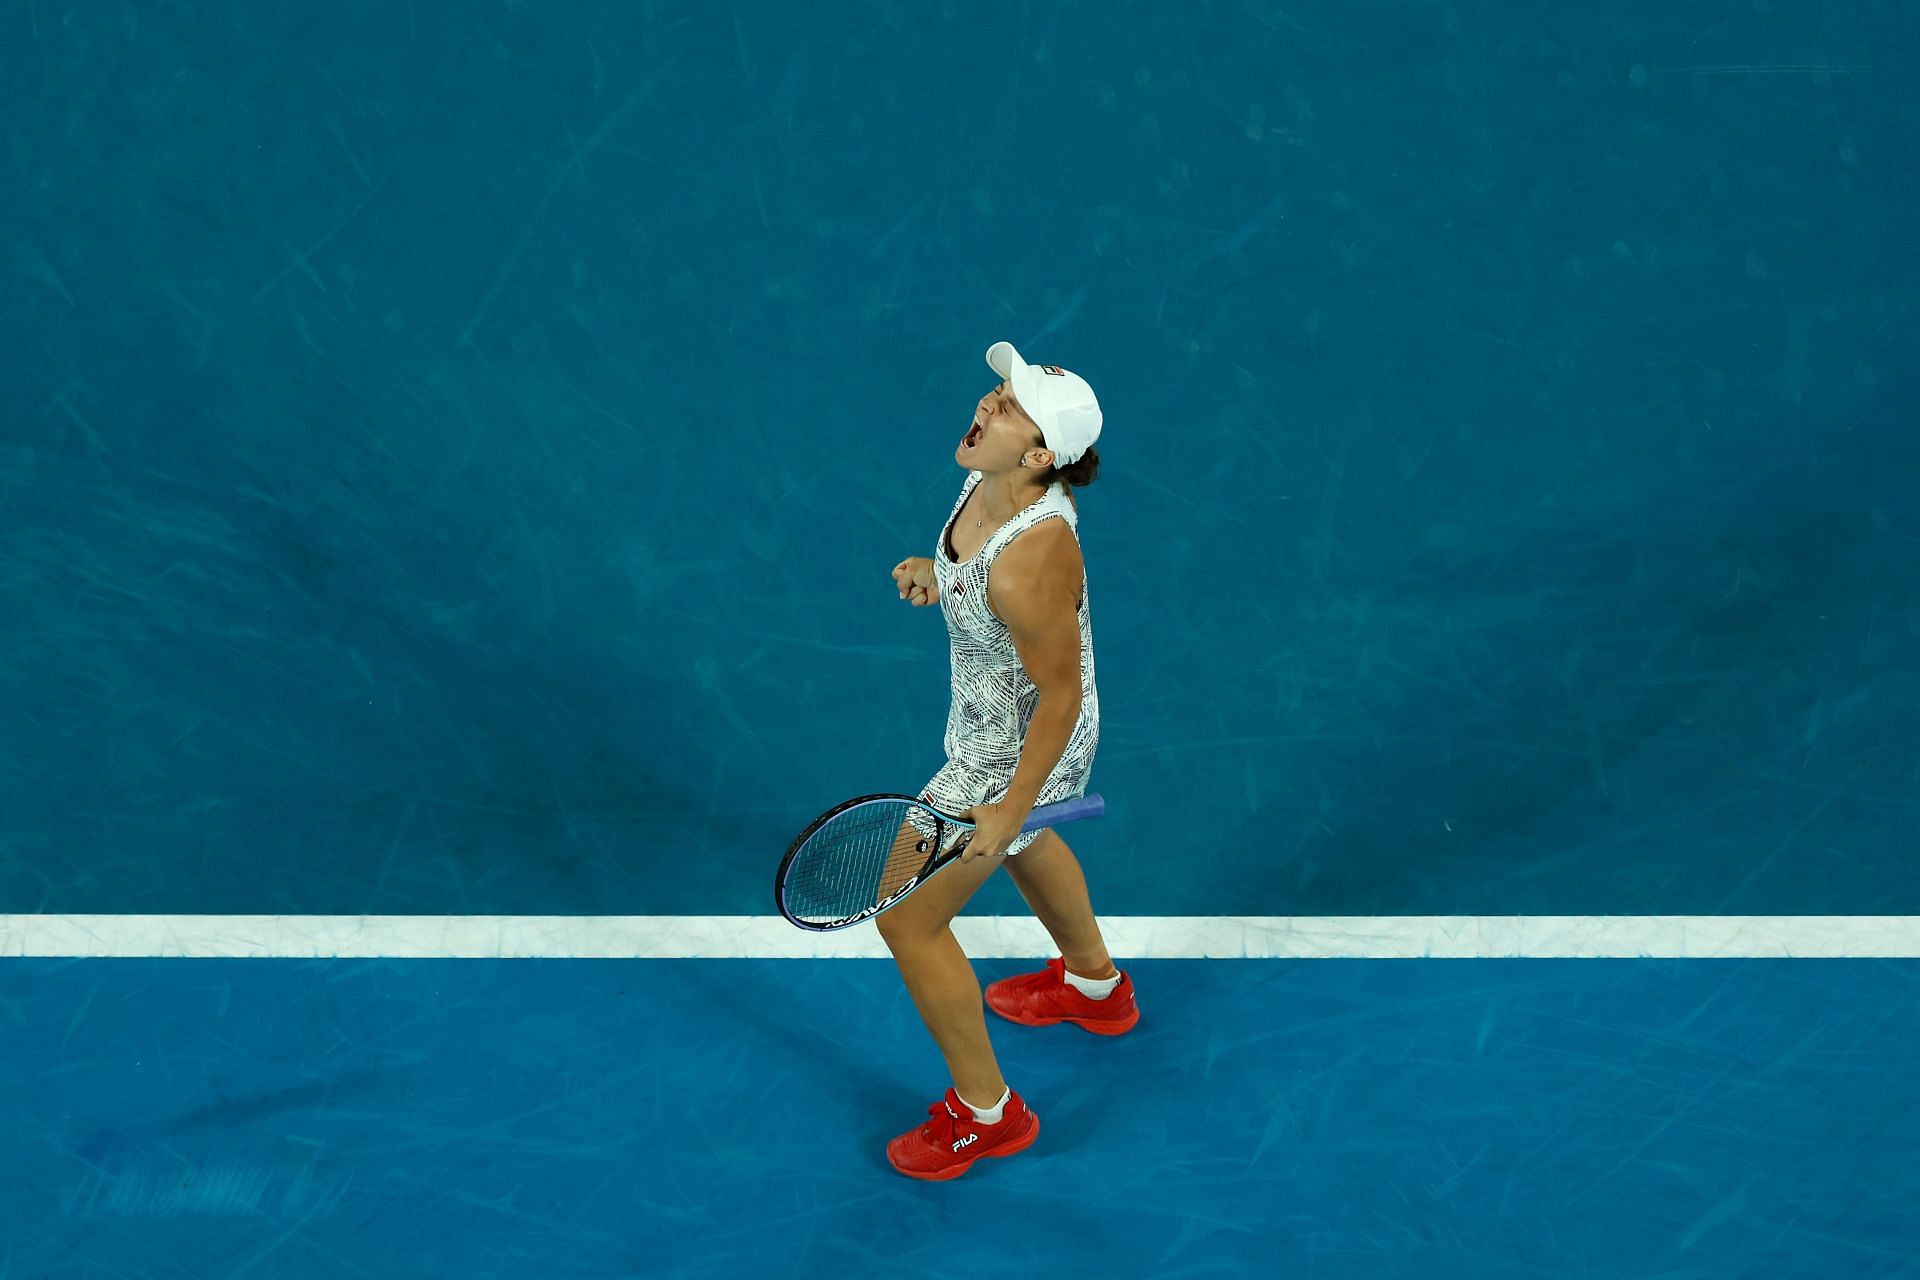 Ashleigh Barty won her third Grand Slam title at the Australian Open